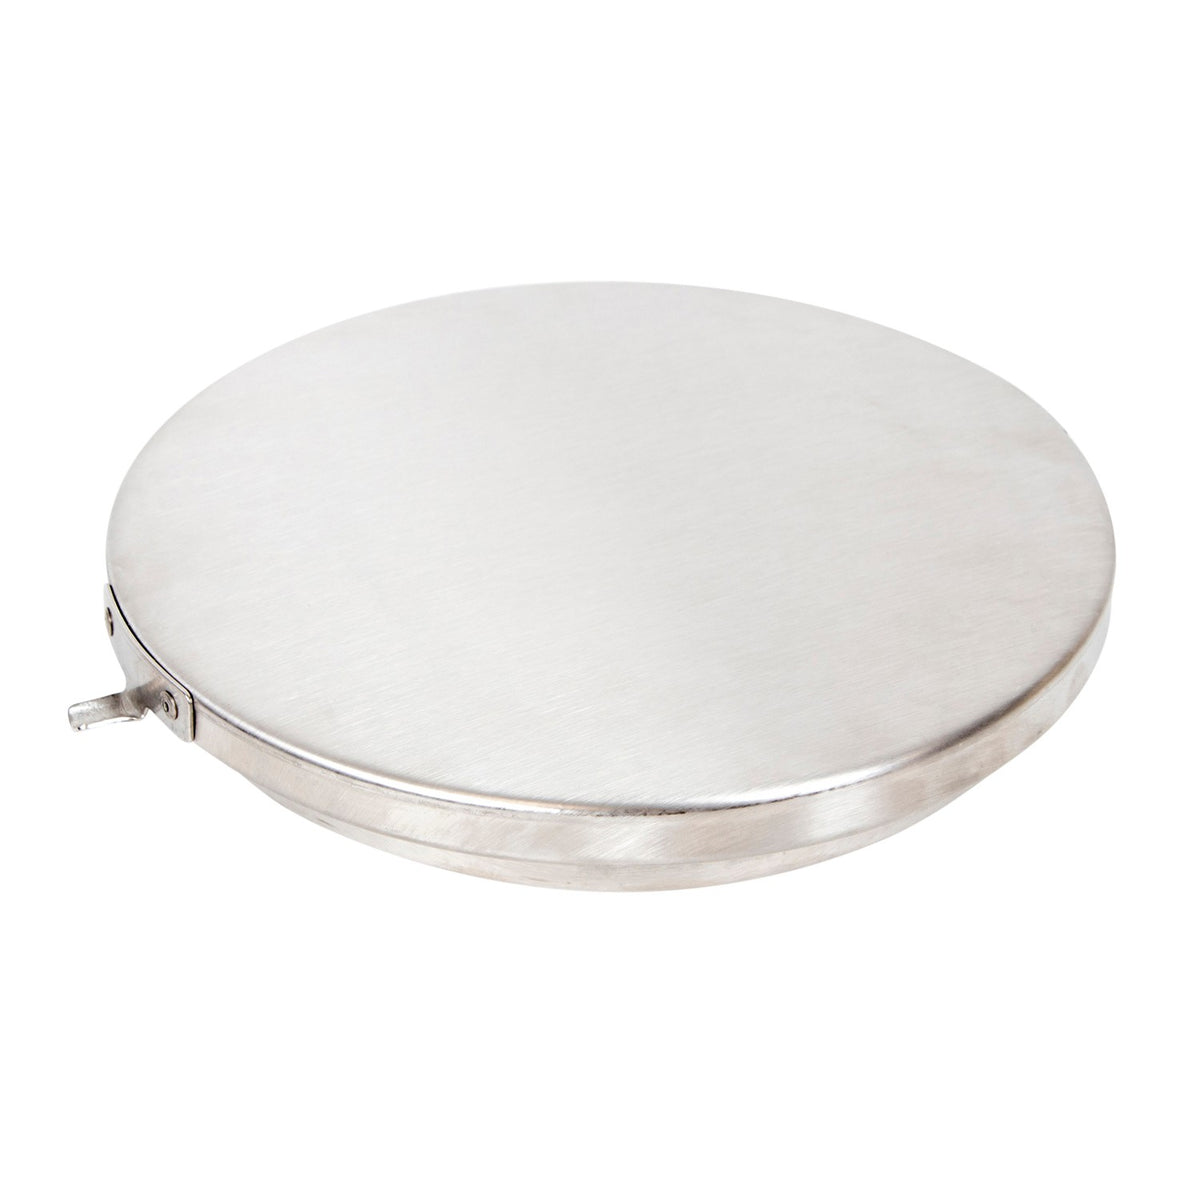 100% Stainless Steel Makeup Mixing Tray Powder Liquid Cream